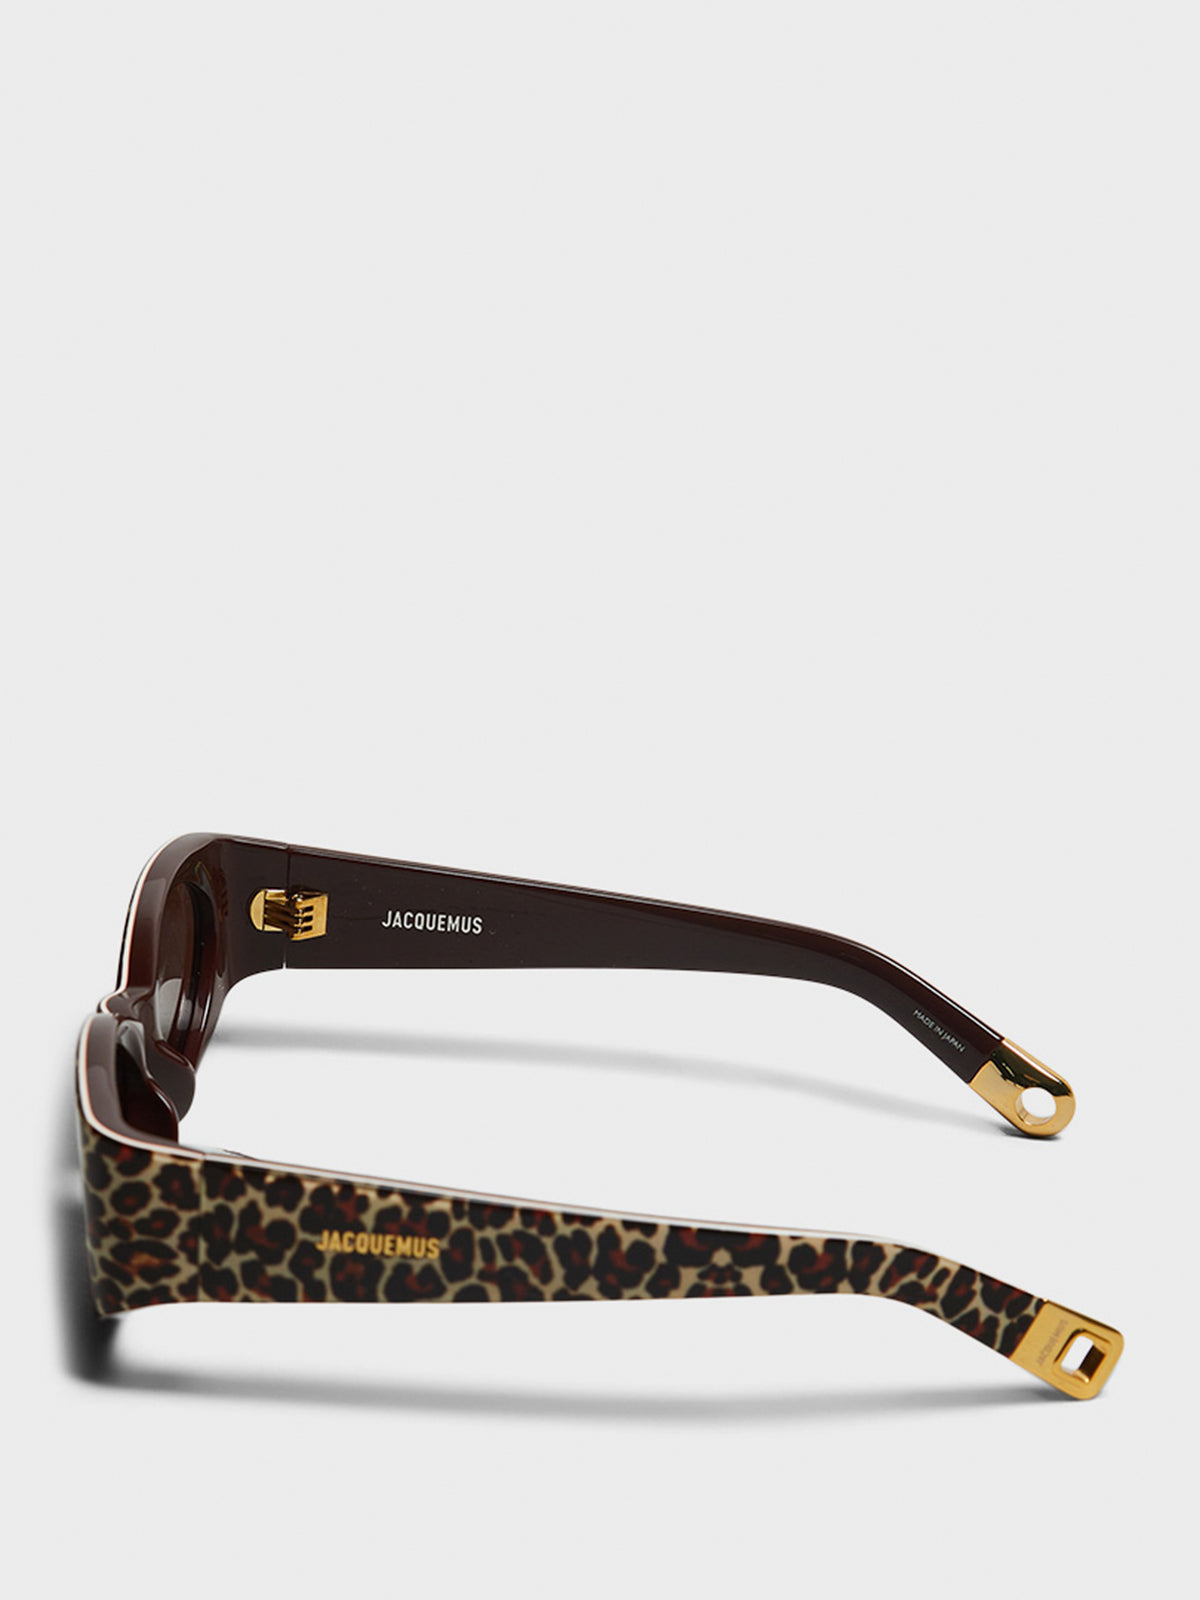 Ovalo Sunglasses in Leopard, Yellow Gold and Brown